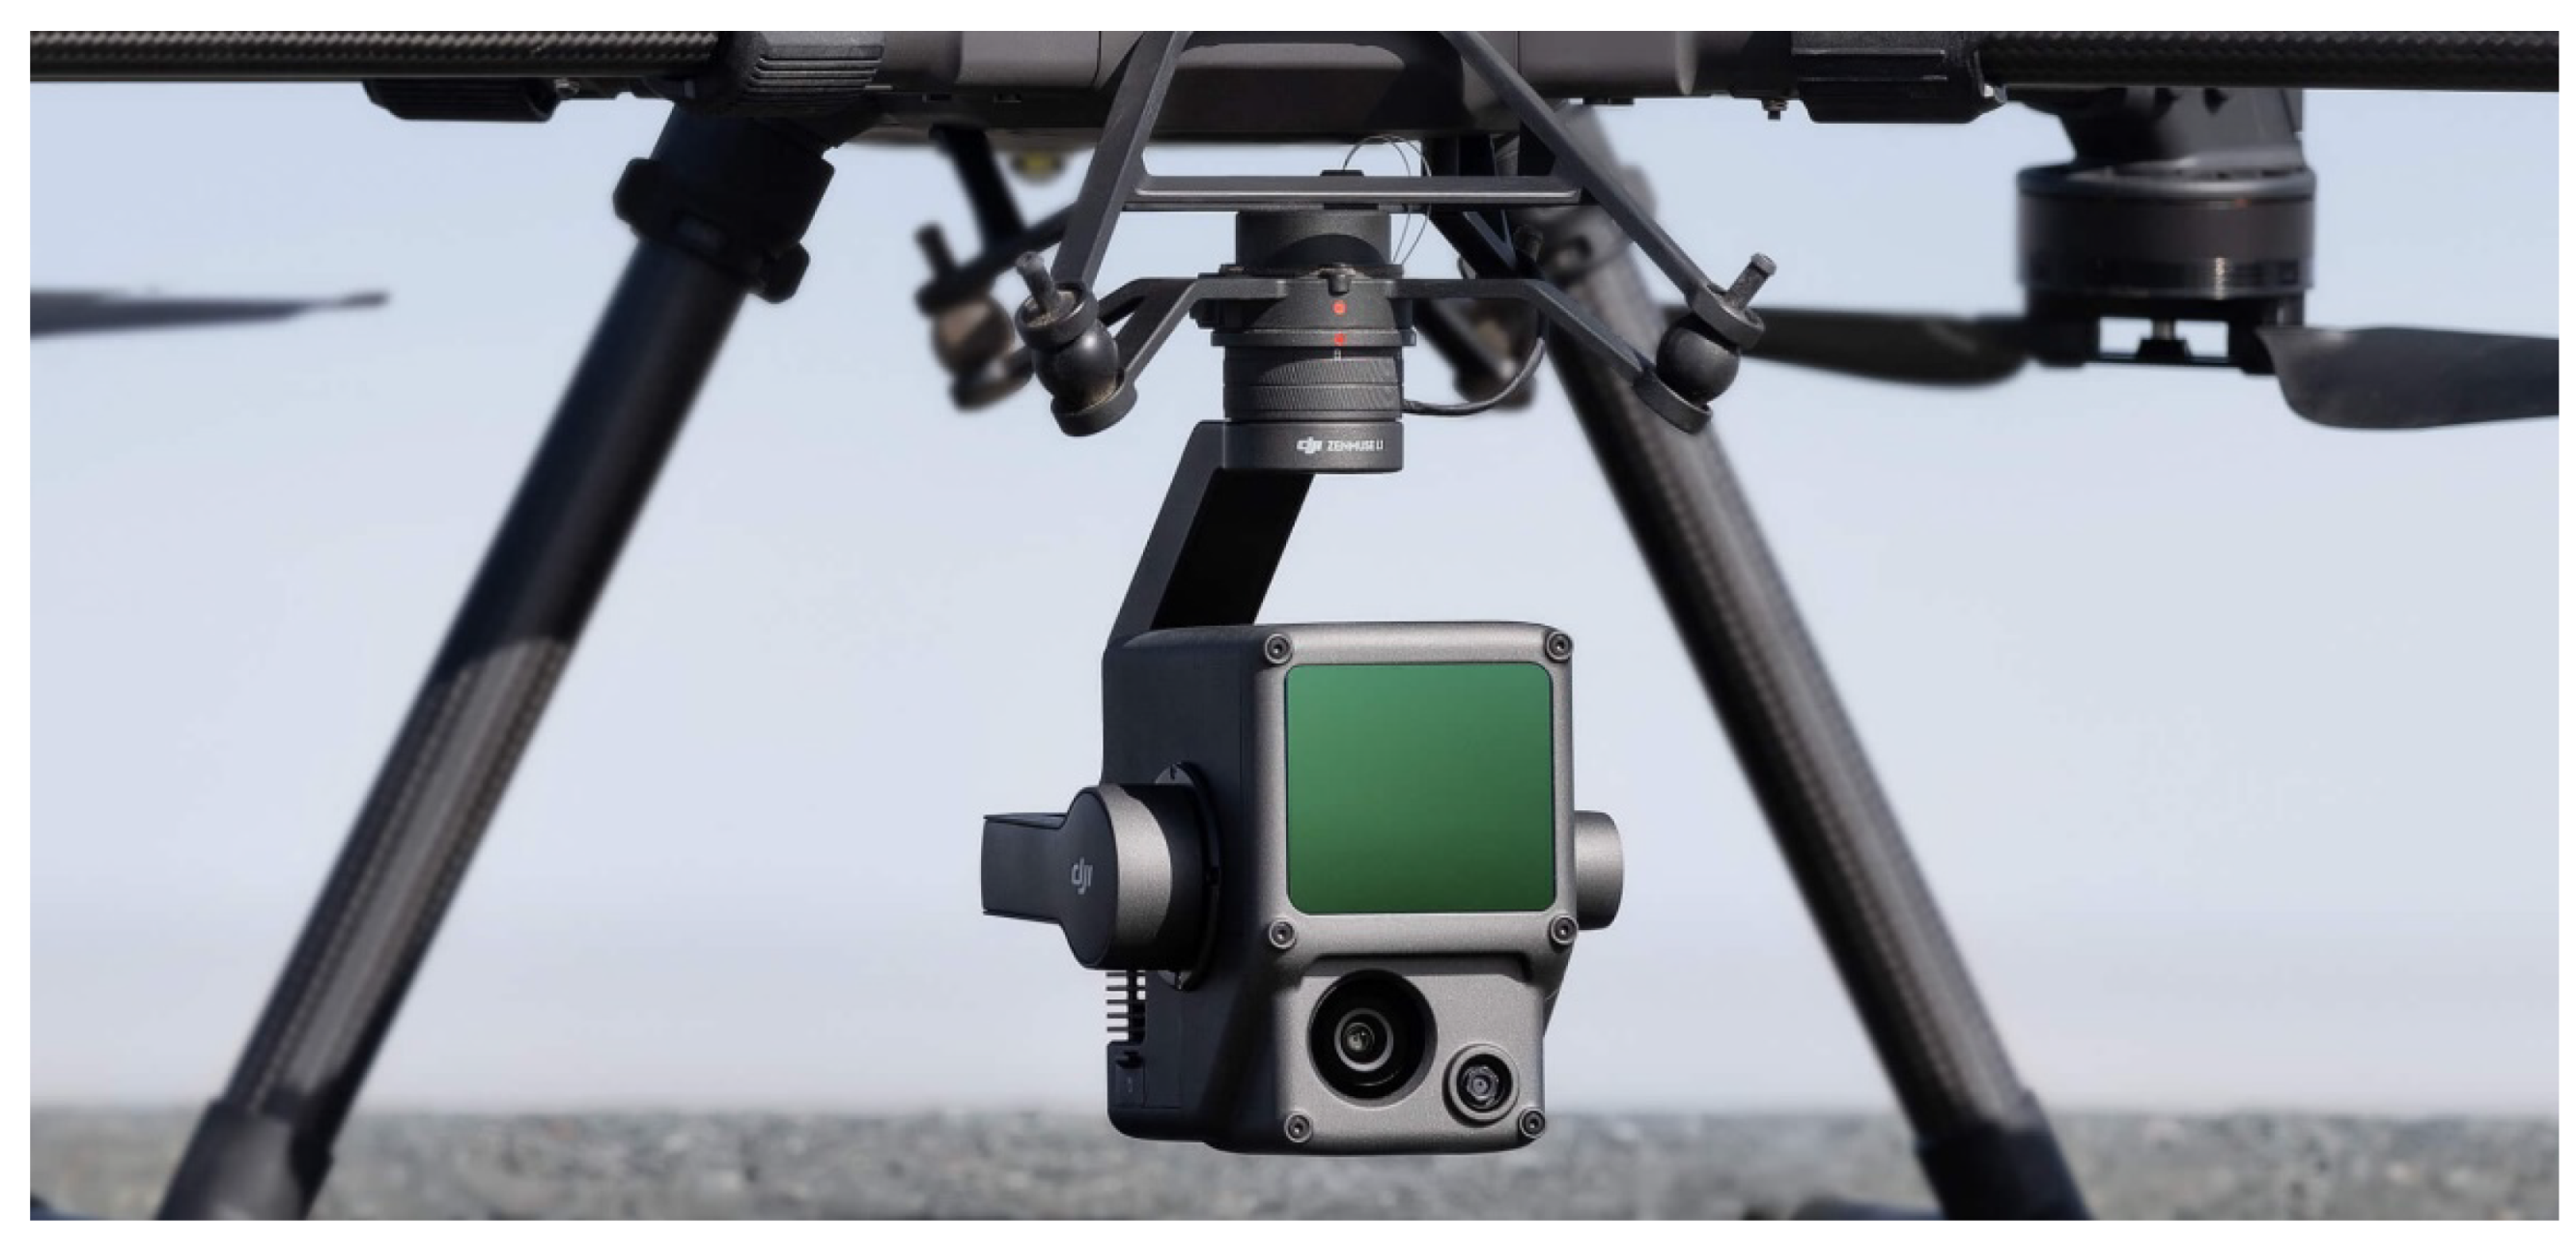 Geomatics | Free Full-Text | Quality Assessment of DJI Zenmuse L1 and P1 LiDAR and Photogrammetric Systems: Metric and Statistics Analysis with Integration of Trimble SX10 Data